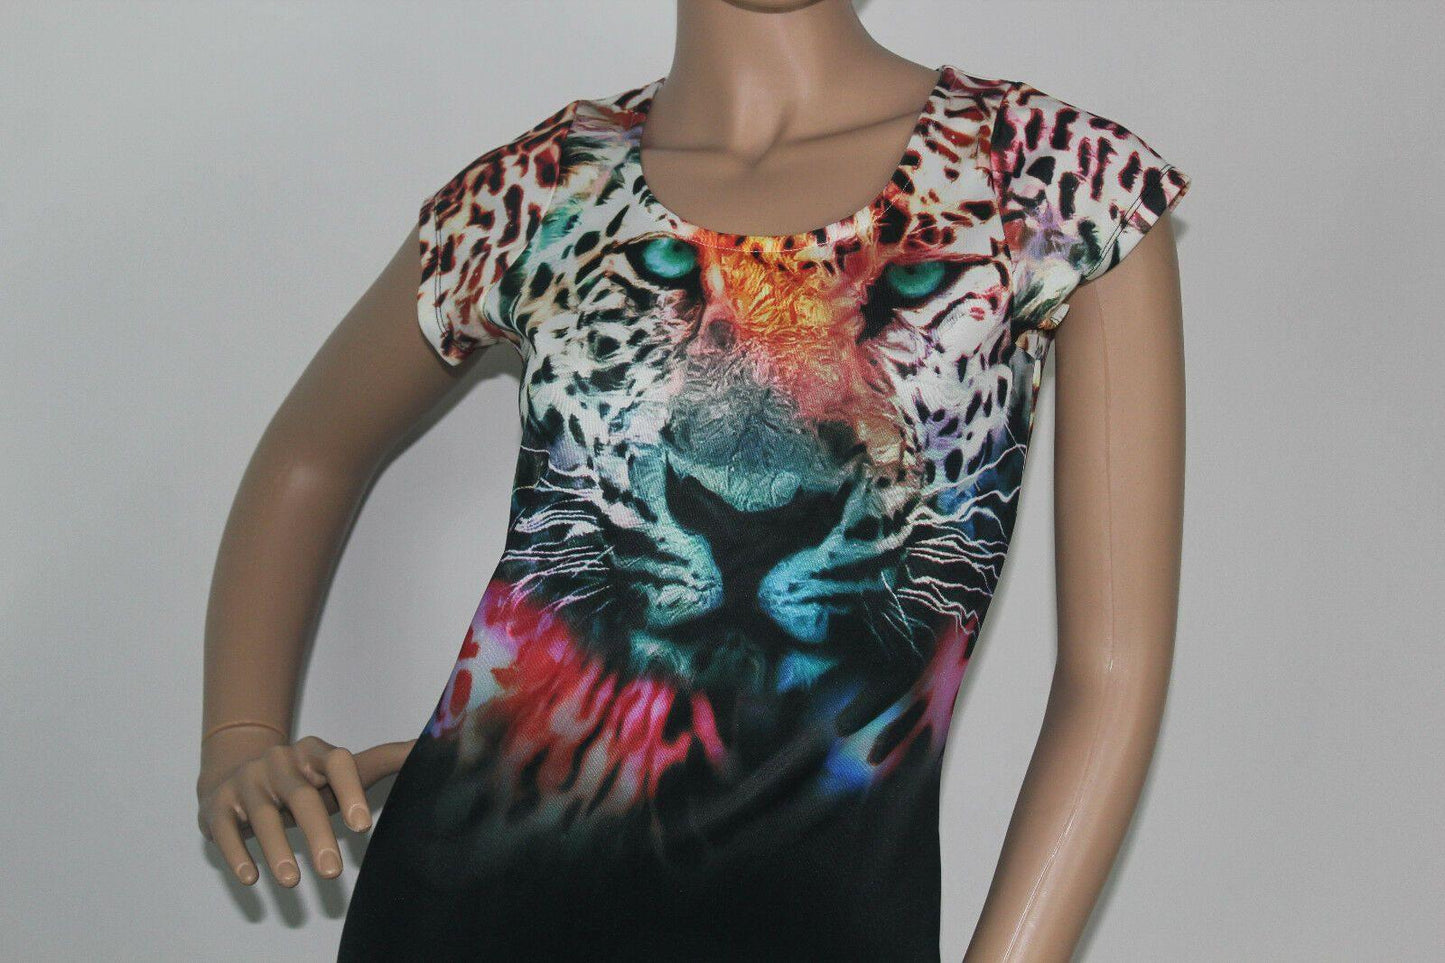 5th & LOVE  Cut Out Back Women's Dress Tiger Multi-Color Cap Sleeve  Size M - SVNYFancy